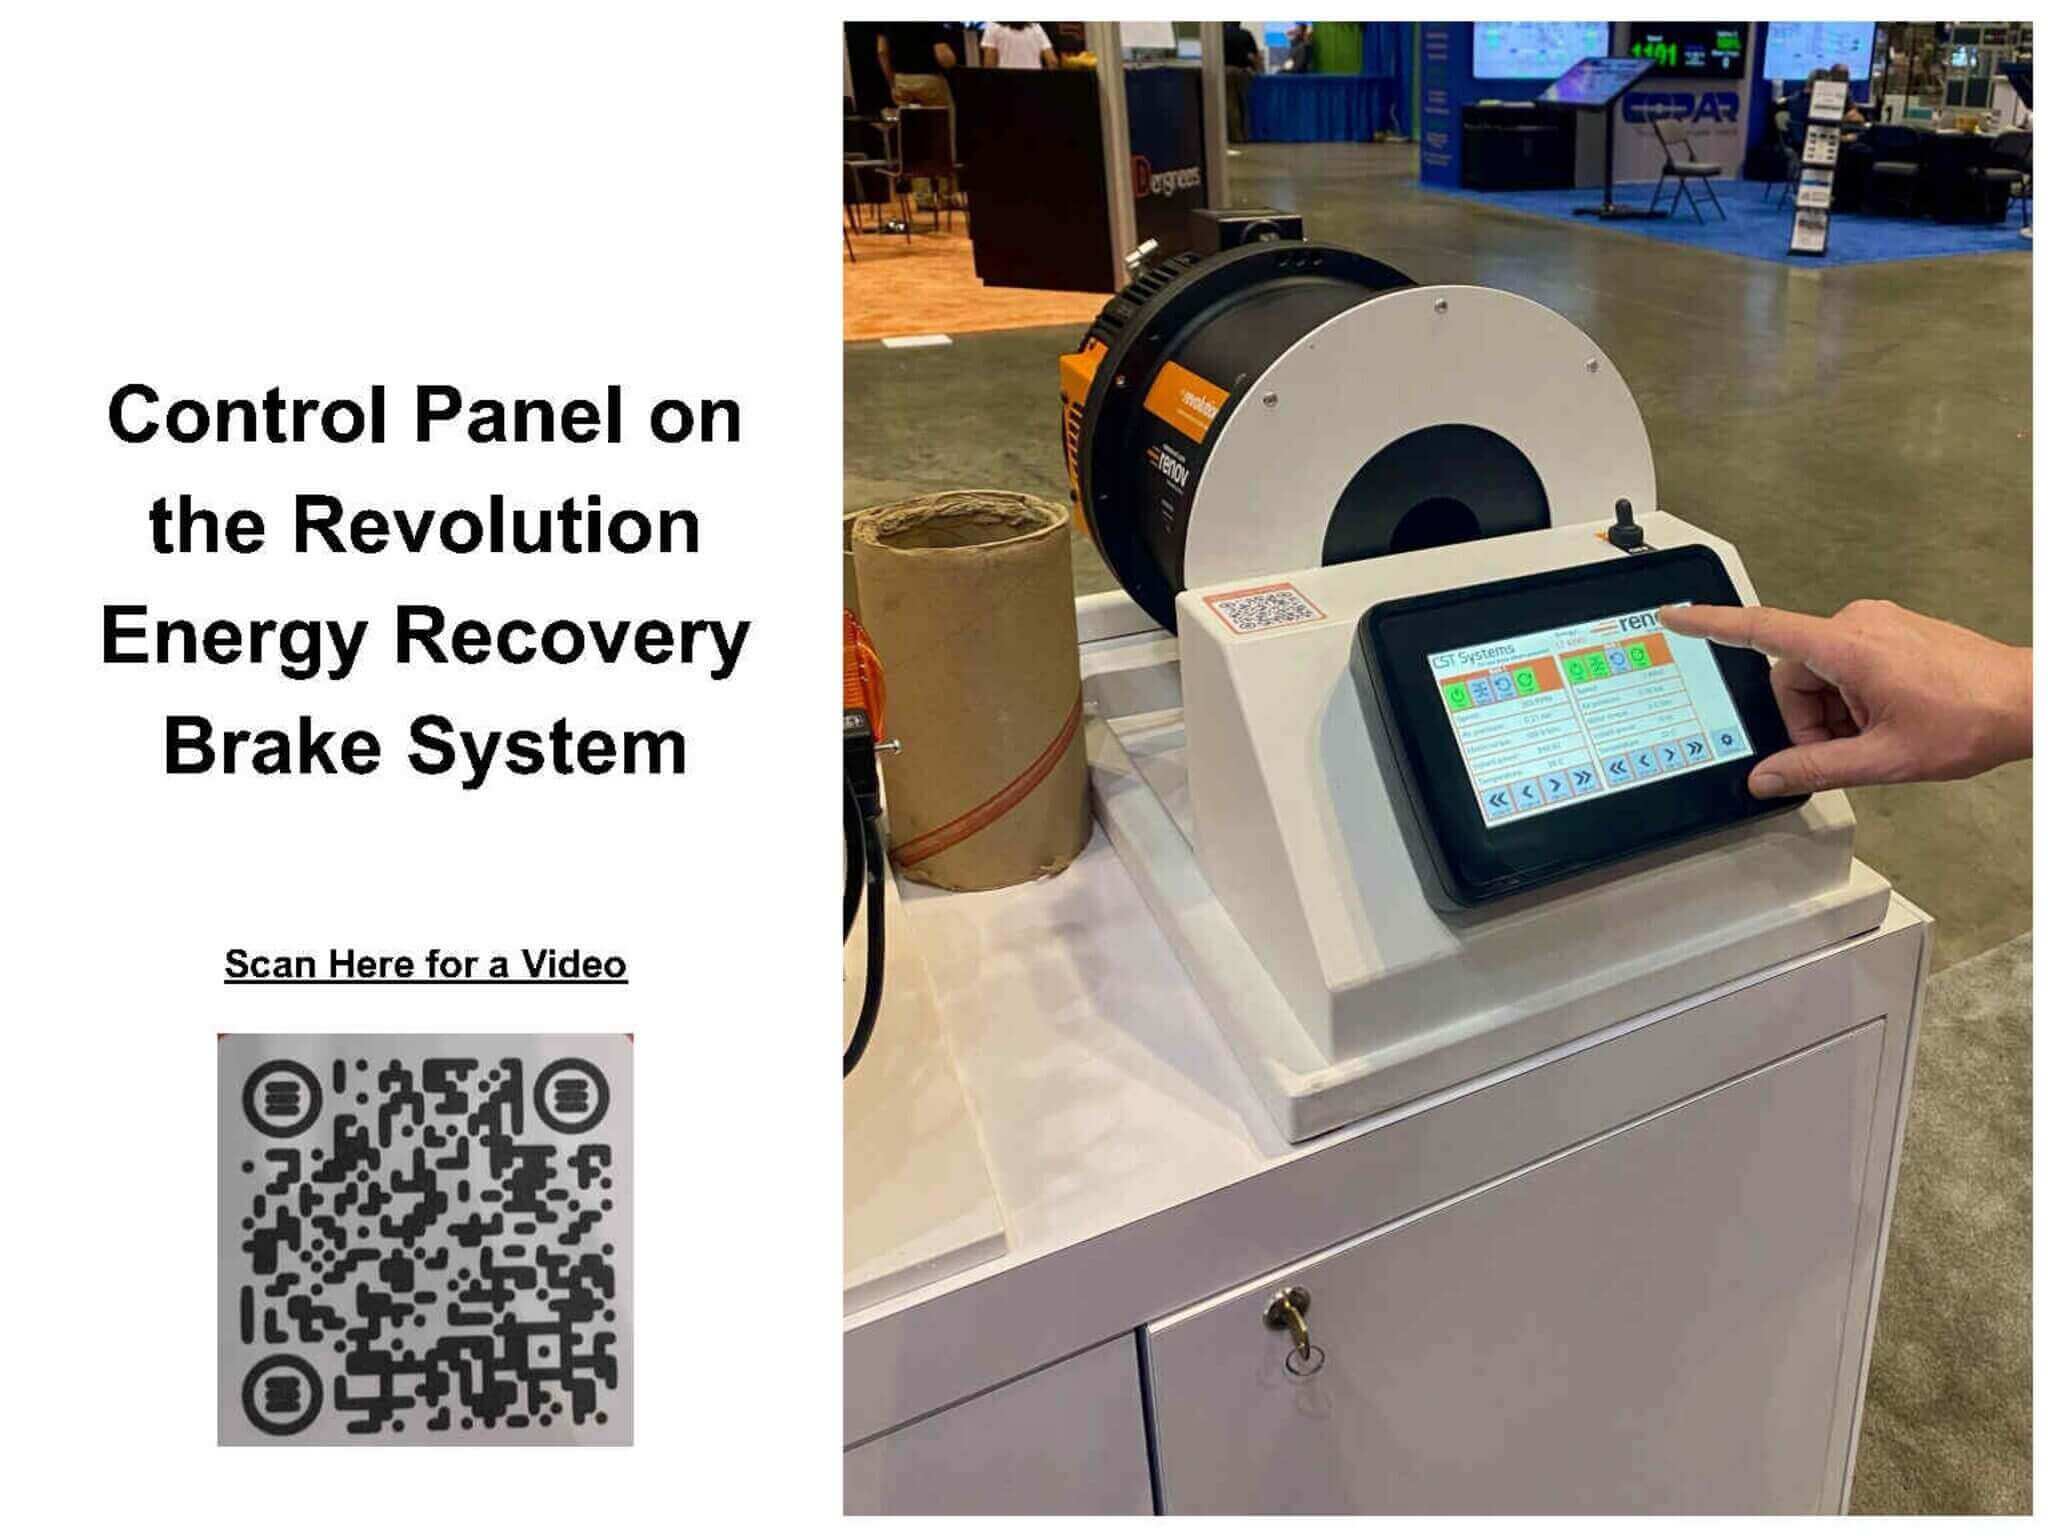 Scan Code for Revolution Energy Recovery Brake System